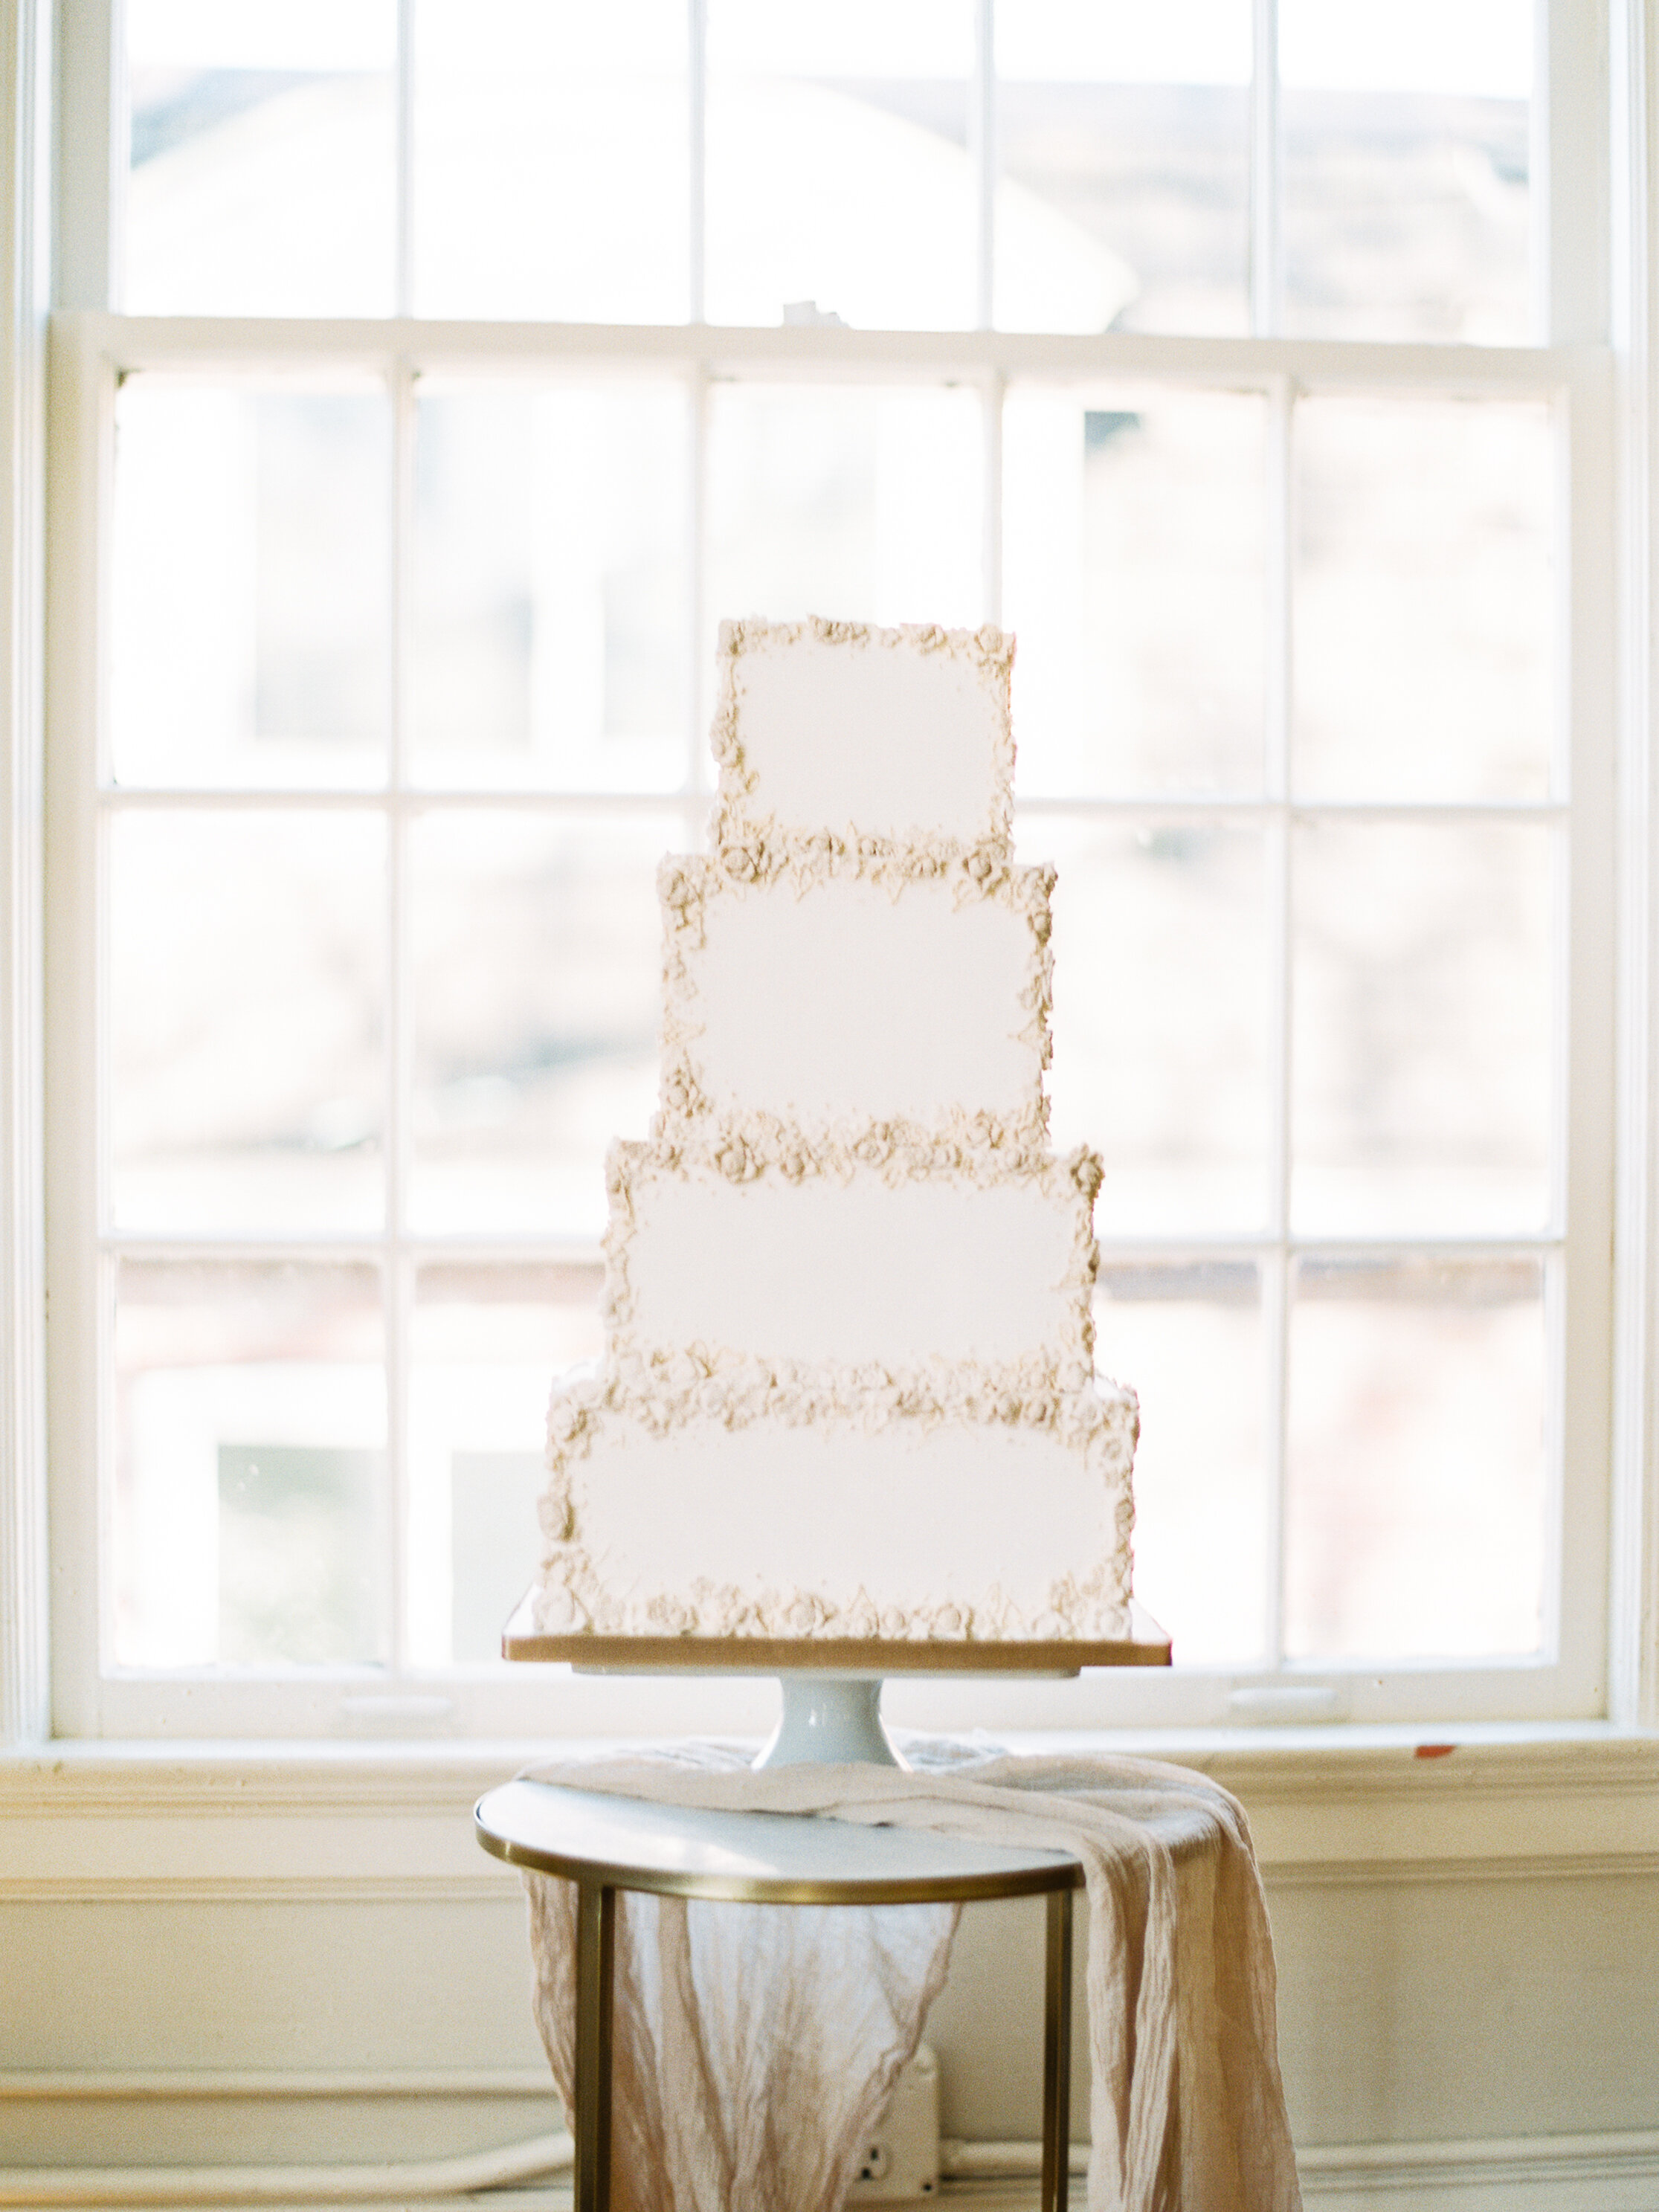 DAR Rainier Chapter House Wedding Cake The Sweet Side Seattle | Pacific Engagements | Square Wedding Cakes with Sugar Flowers